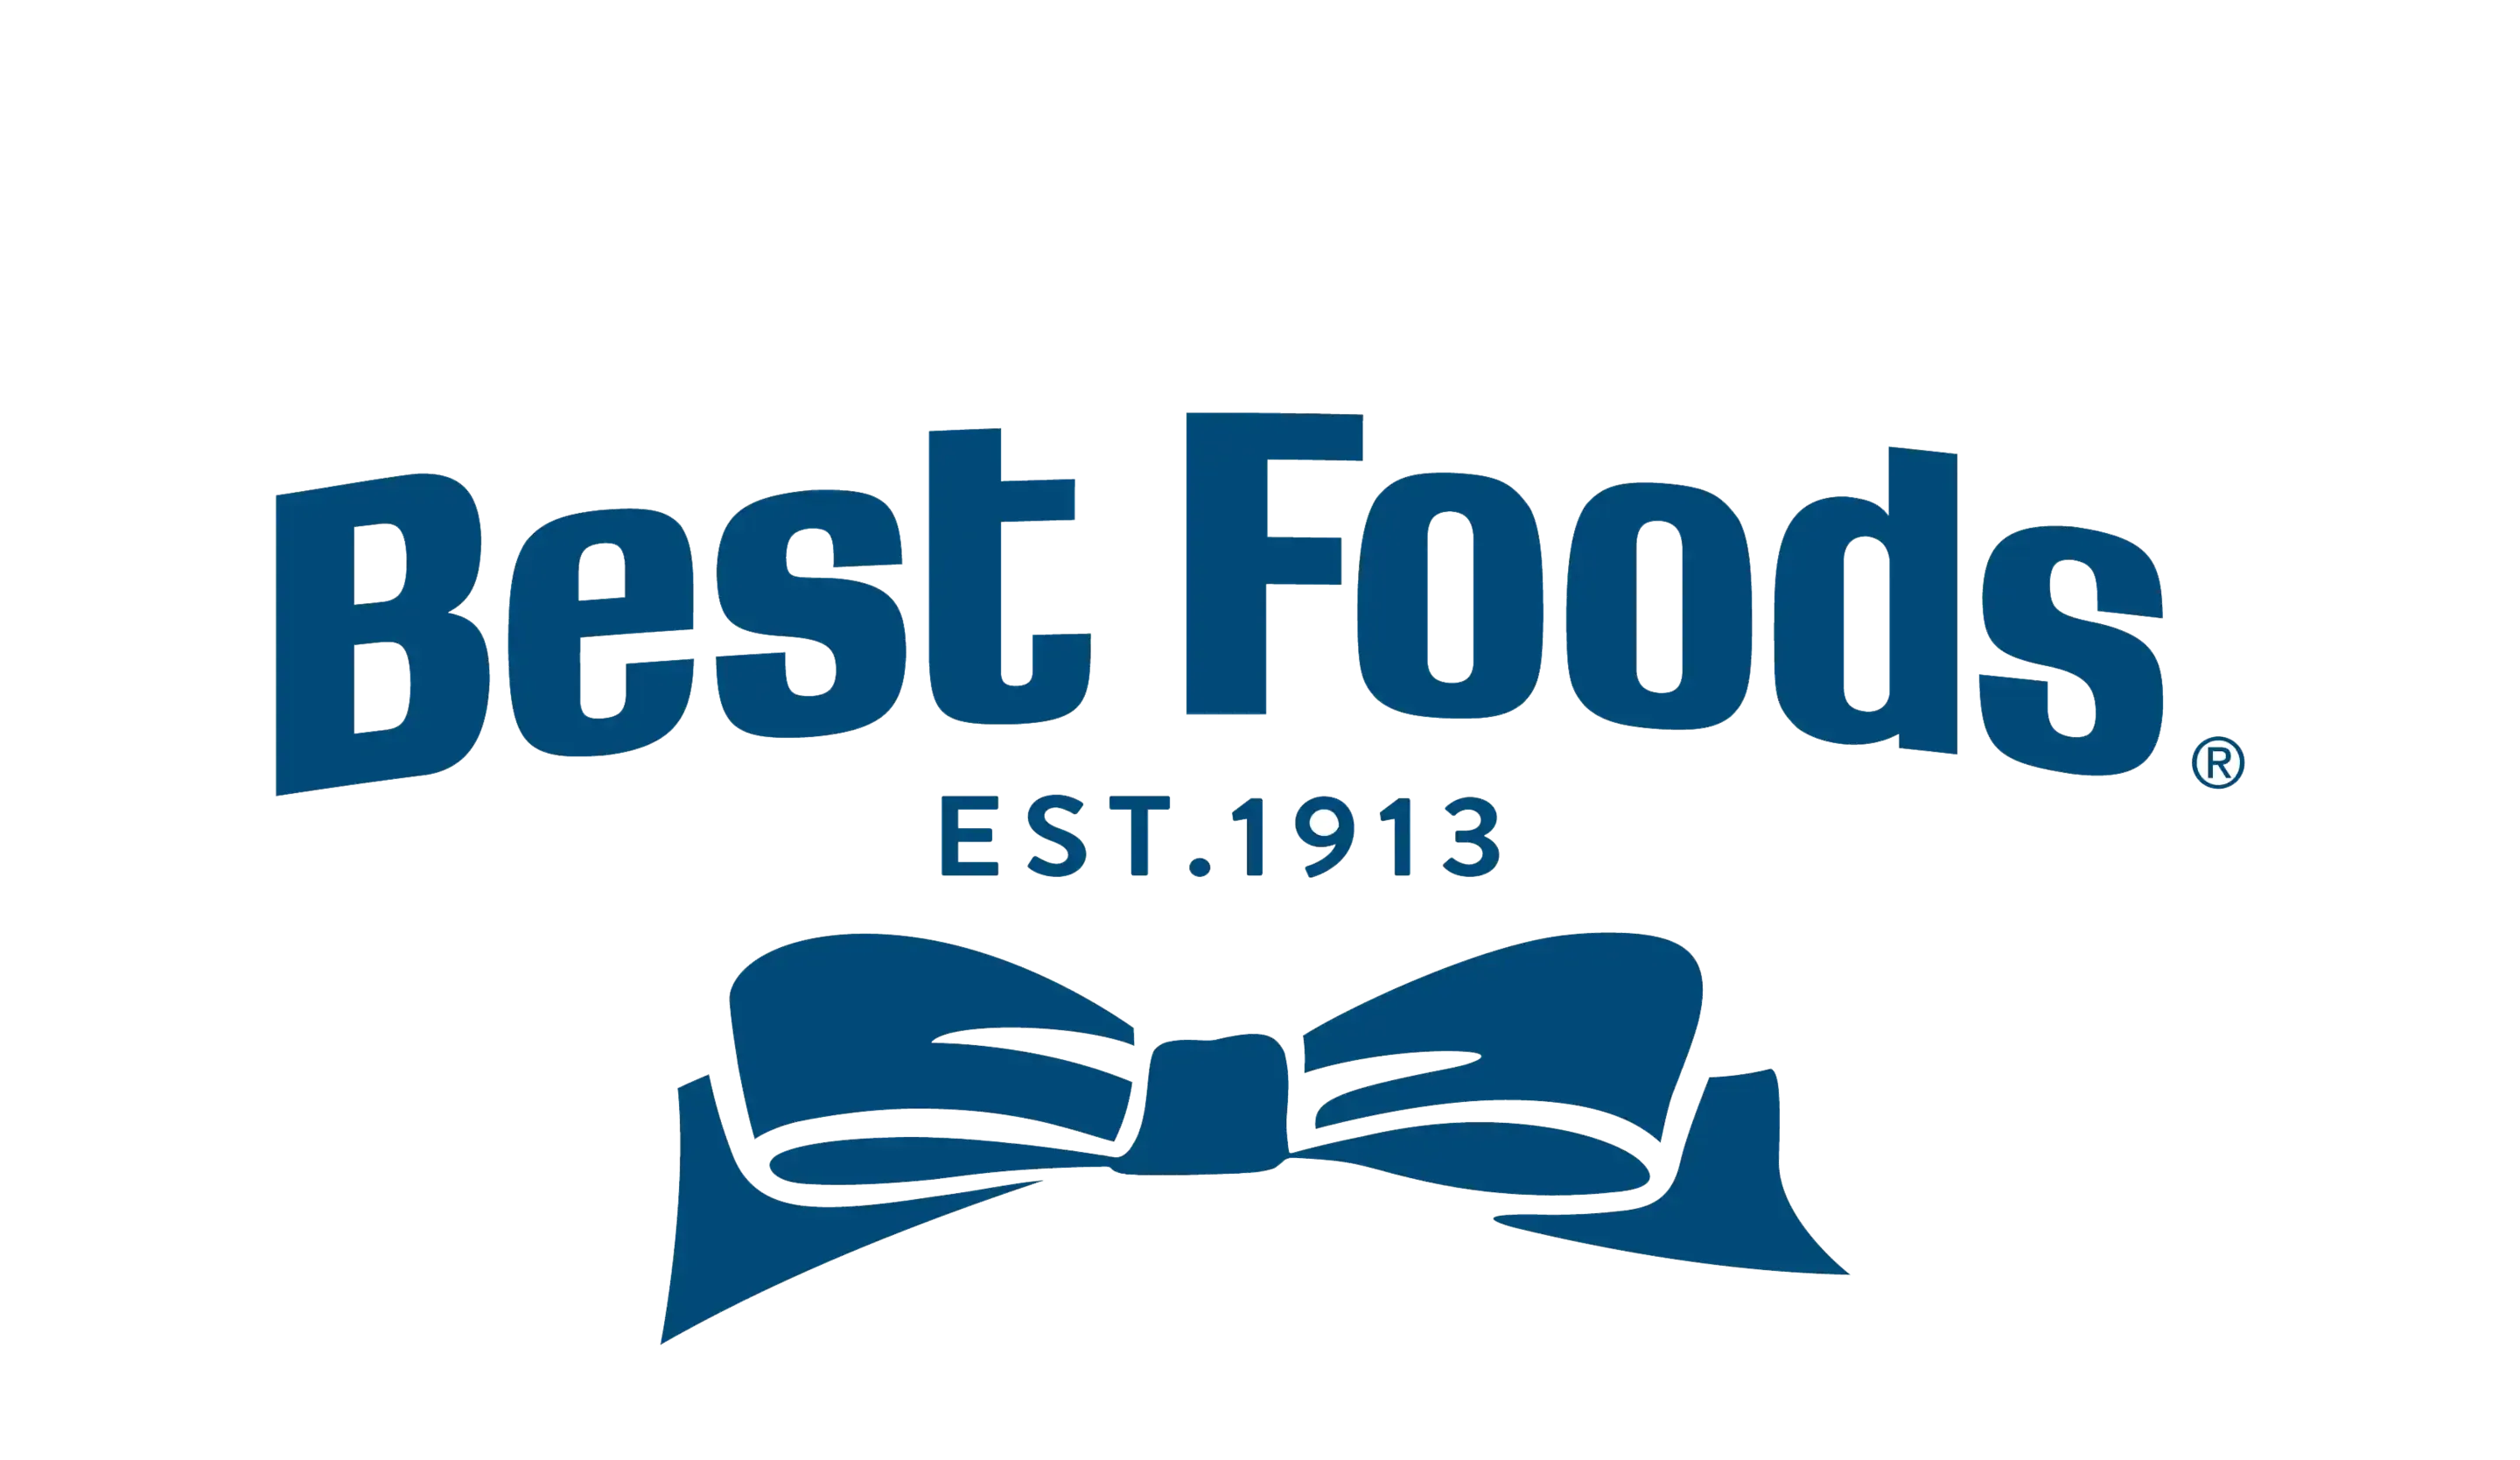 Cut Money And Shop Happily At Bestfoods.com. More Stores. More Value